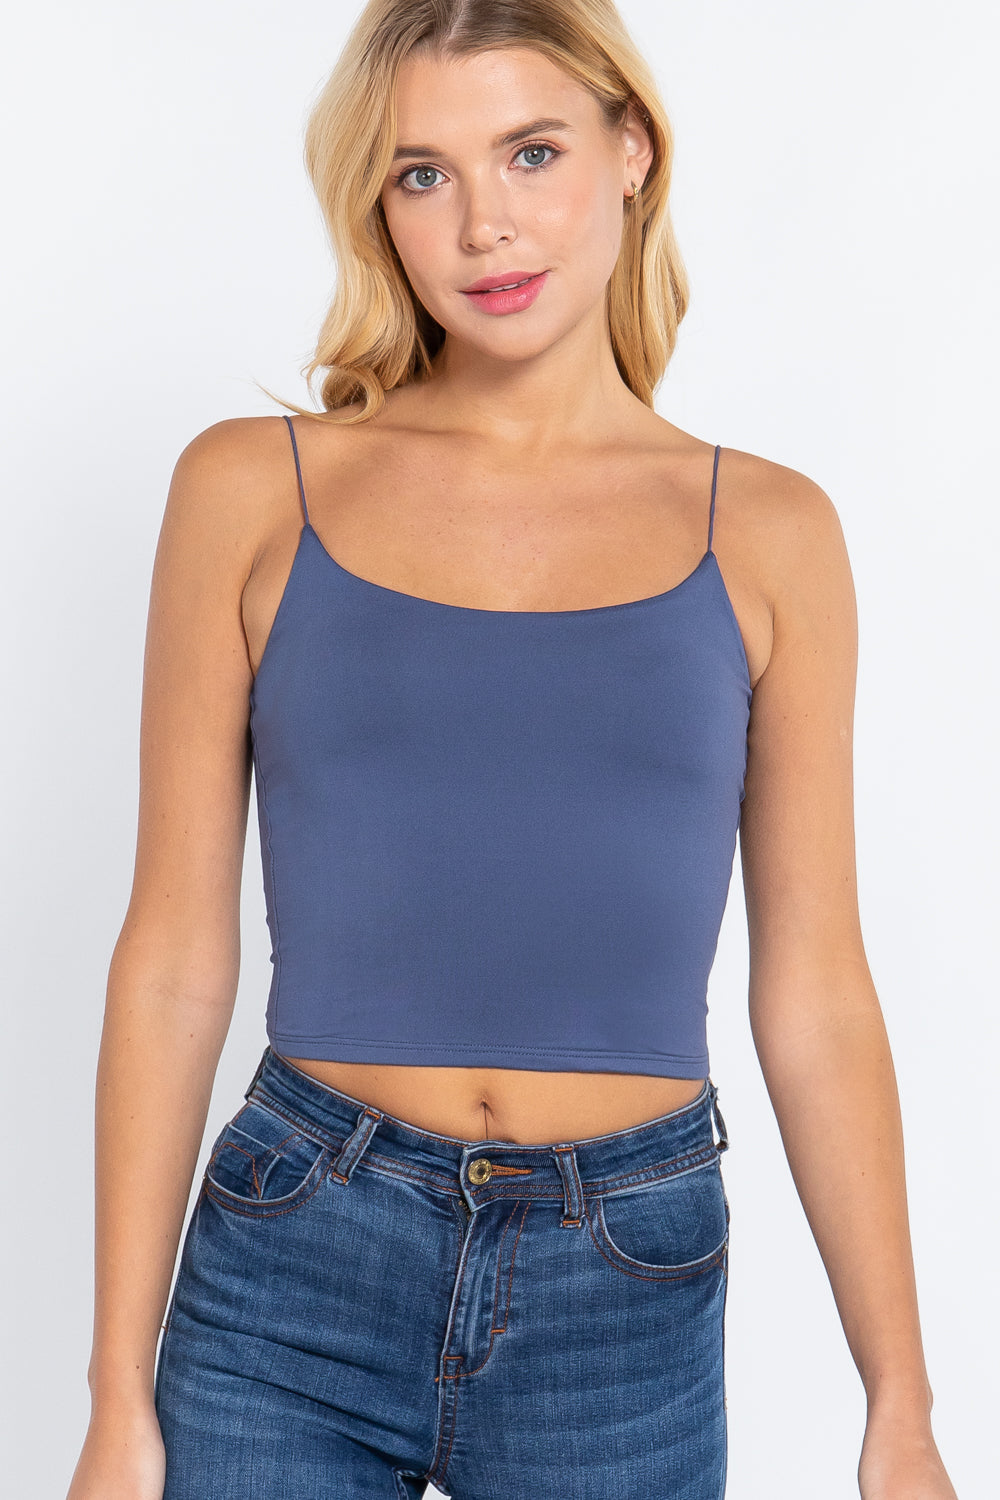 Elastic Strap Two Ply Dty Brushed Knit Cami Top - Tigbul's Fashion